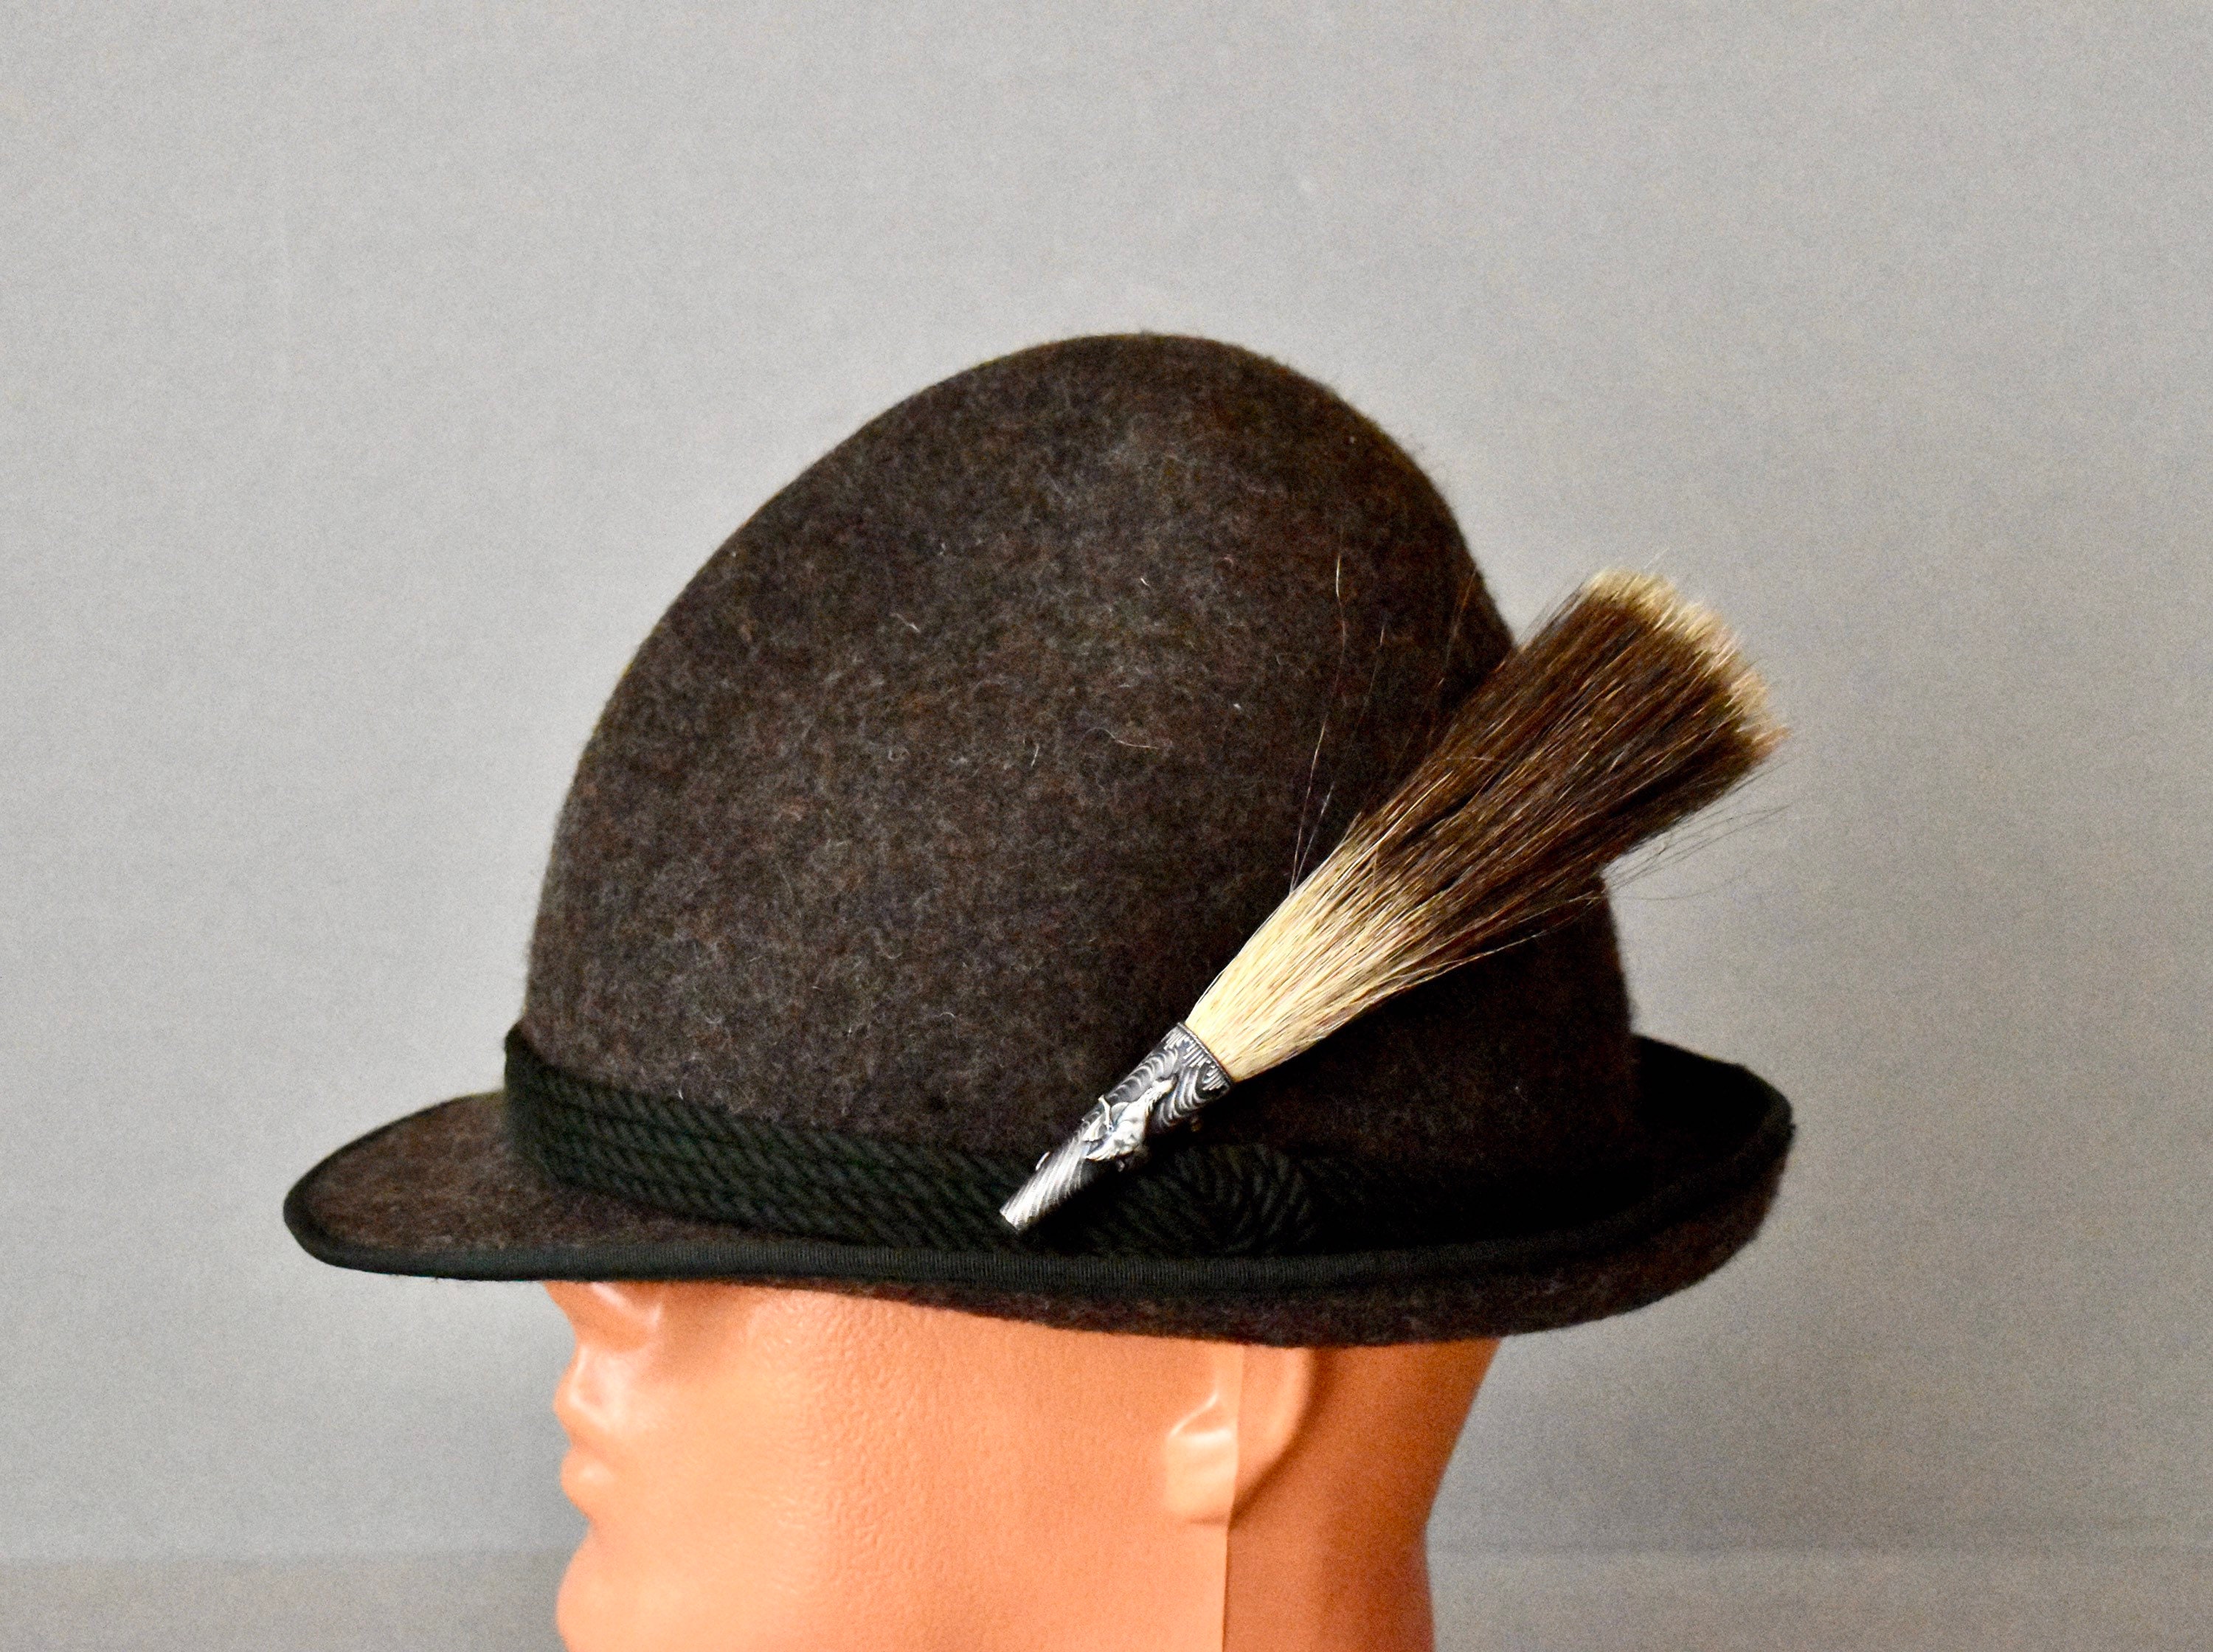 Authentic Original Vintage Style Hunting Hats for Men